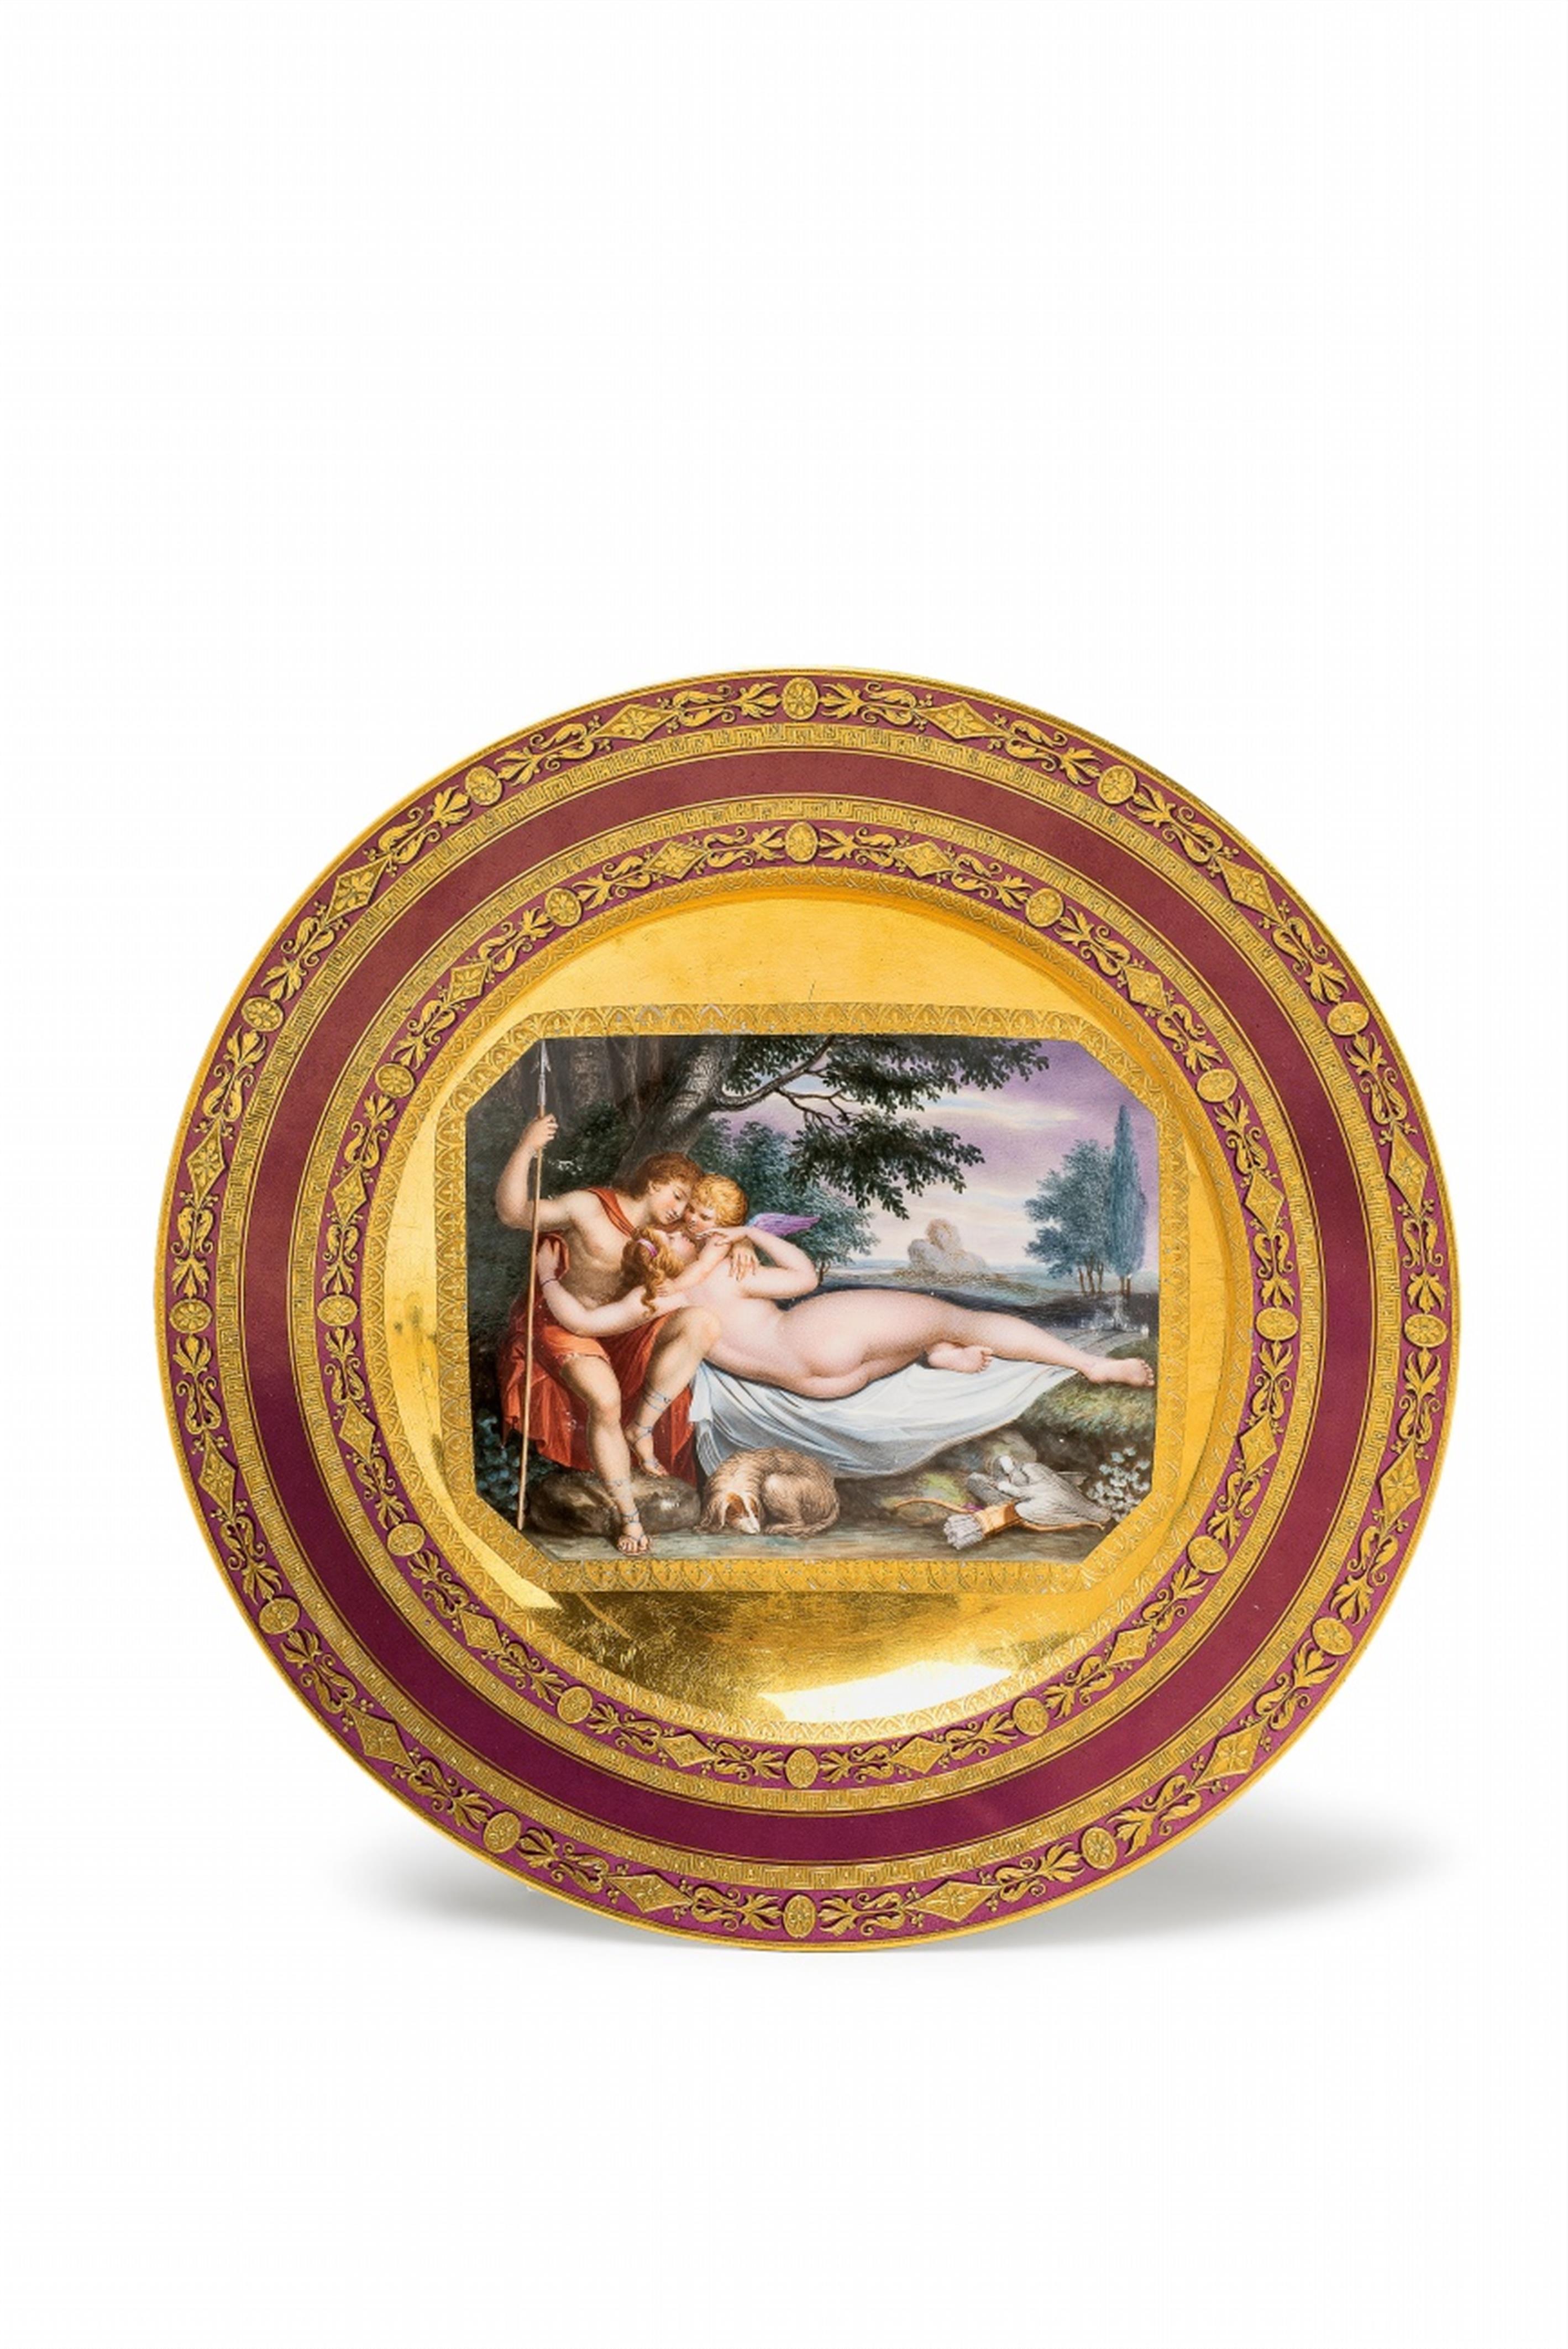 A Vienna porcelain plate with Venus and Adonis - image-1